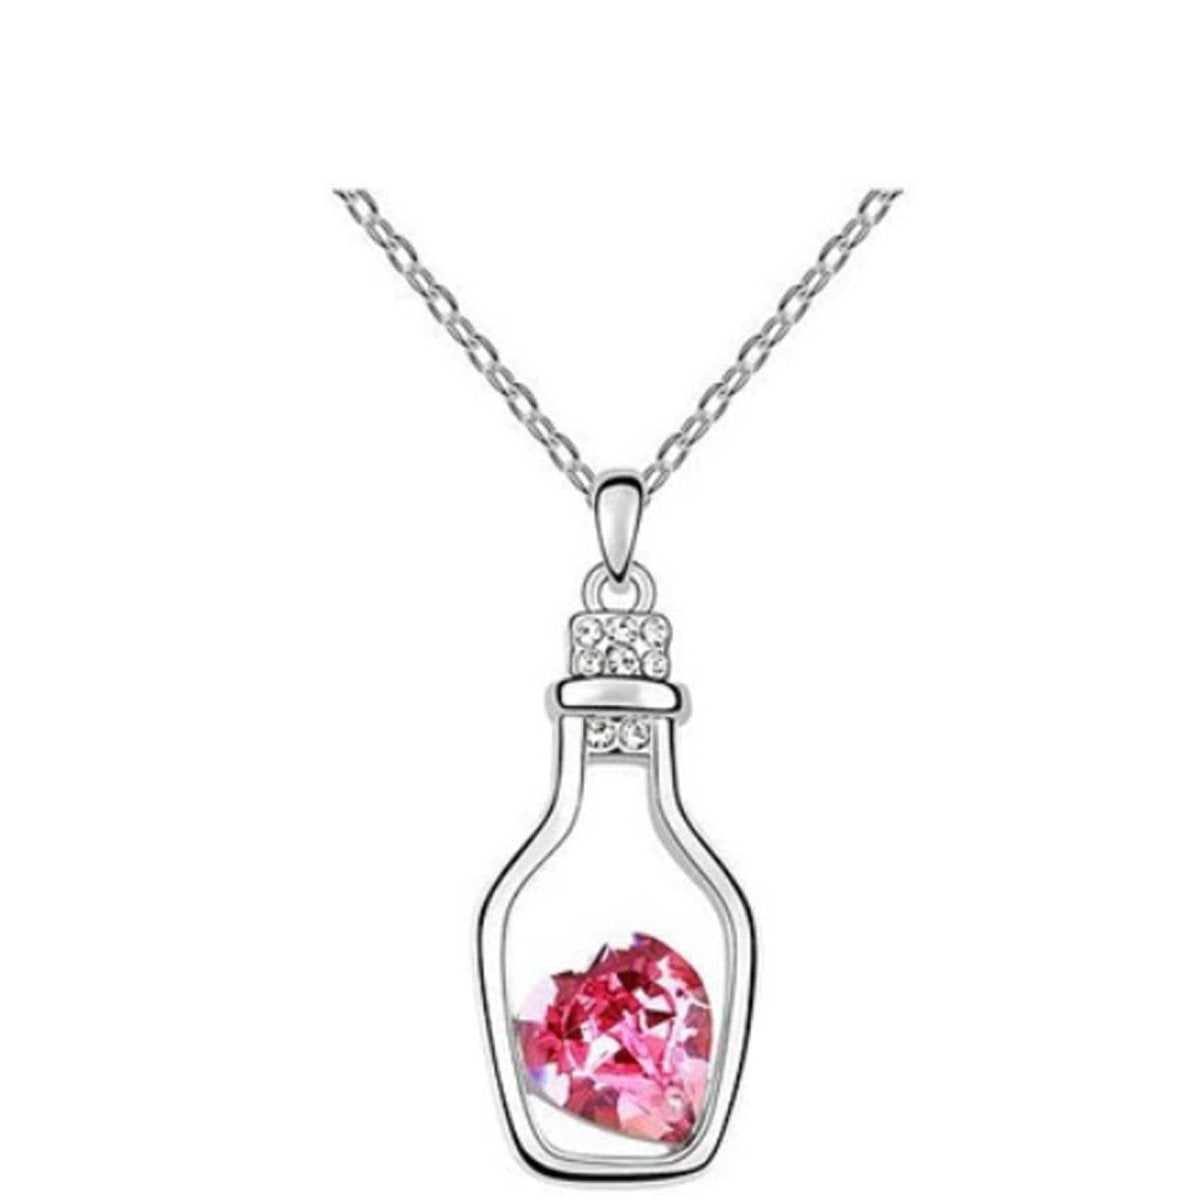 Wishing Bottle Necklace Chokers Trends Vintage Pink Womens Jewelry Necklaces